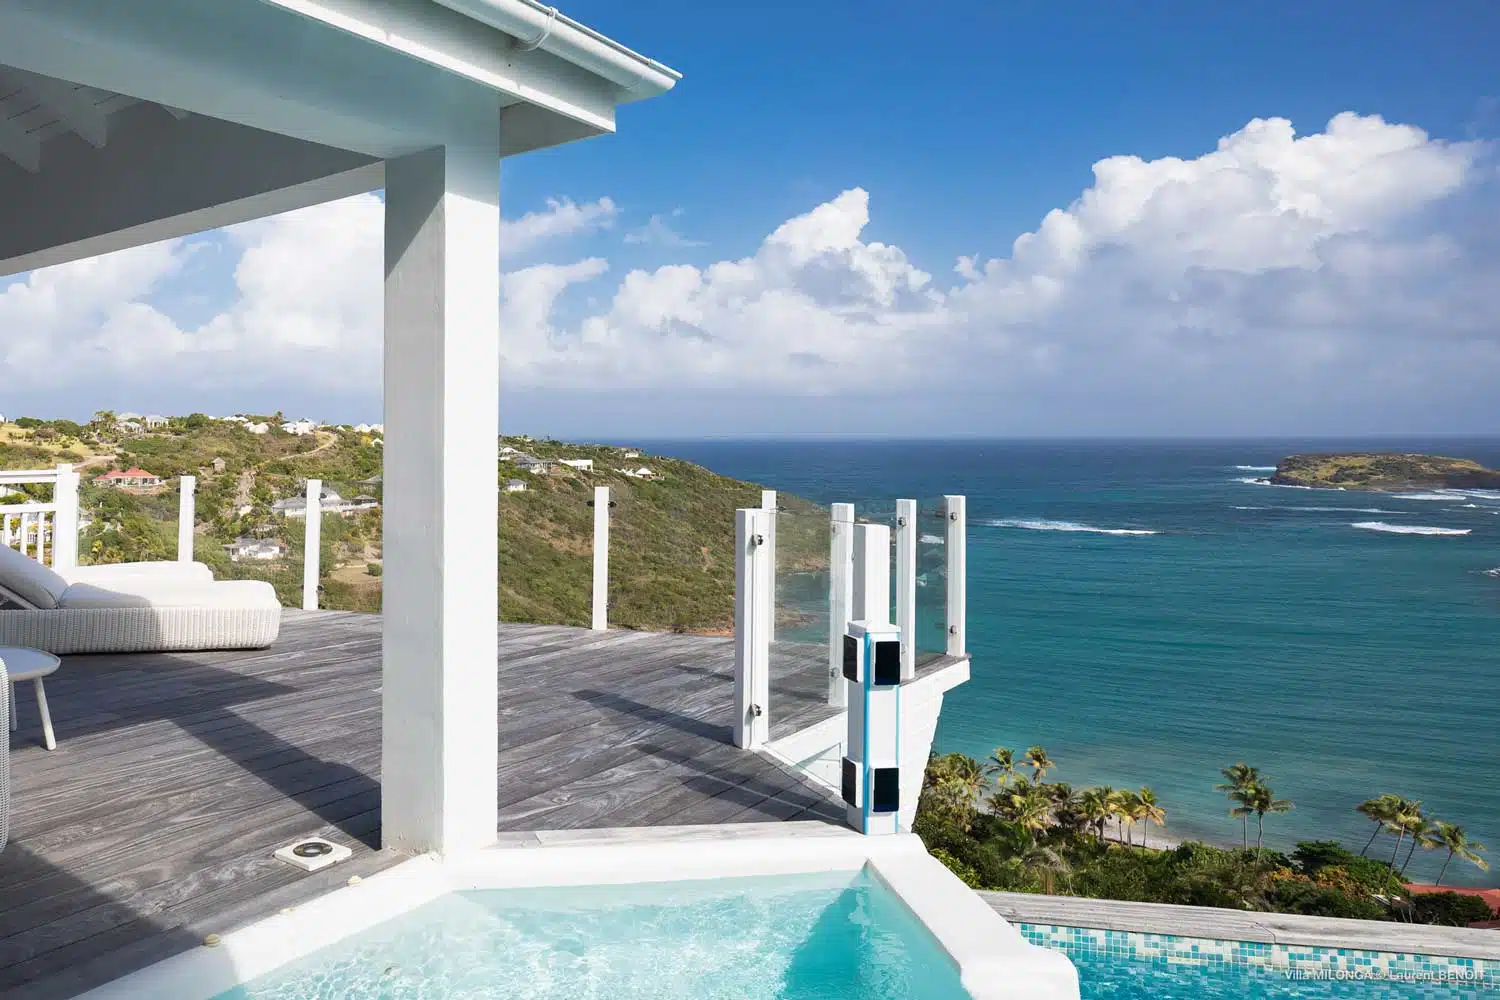 Amazing pool with sea view at Milonga villa - luxury villa for rent in St Barts